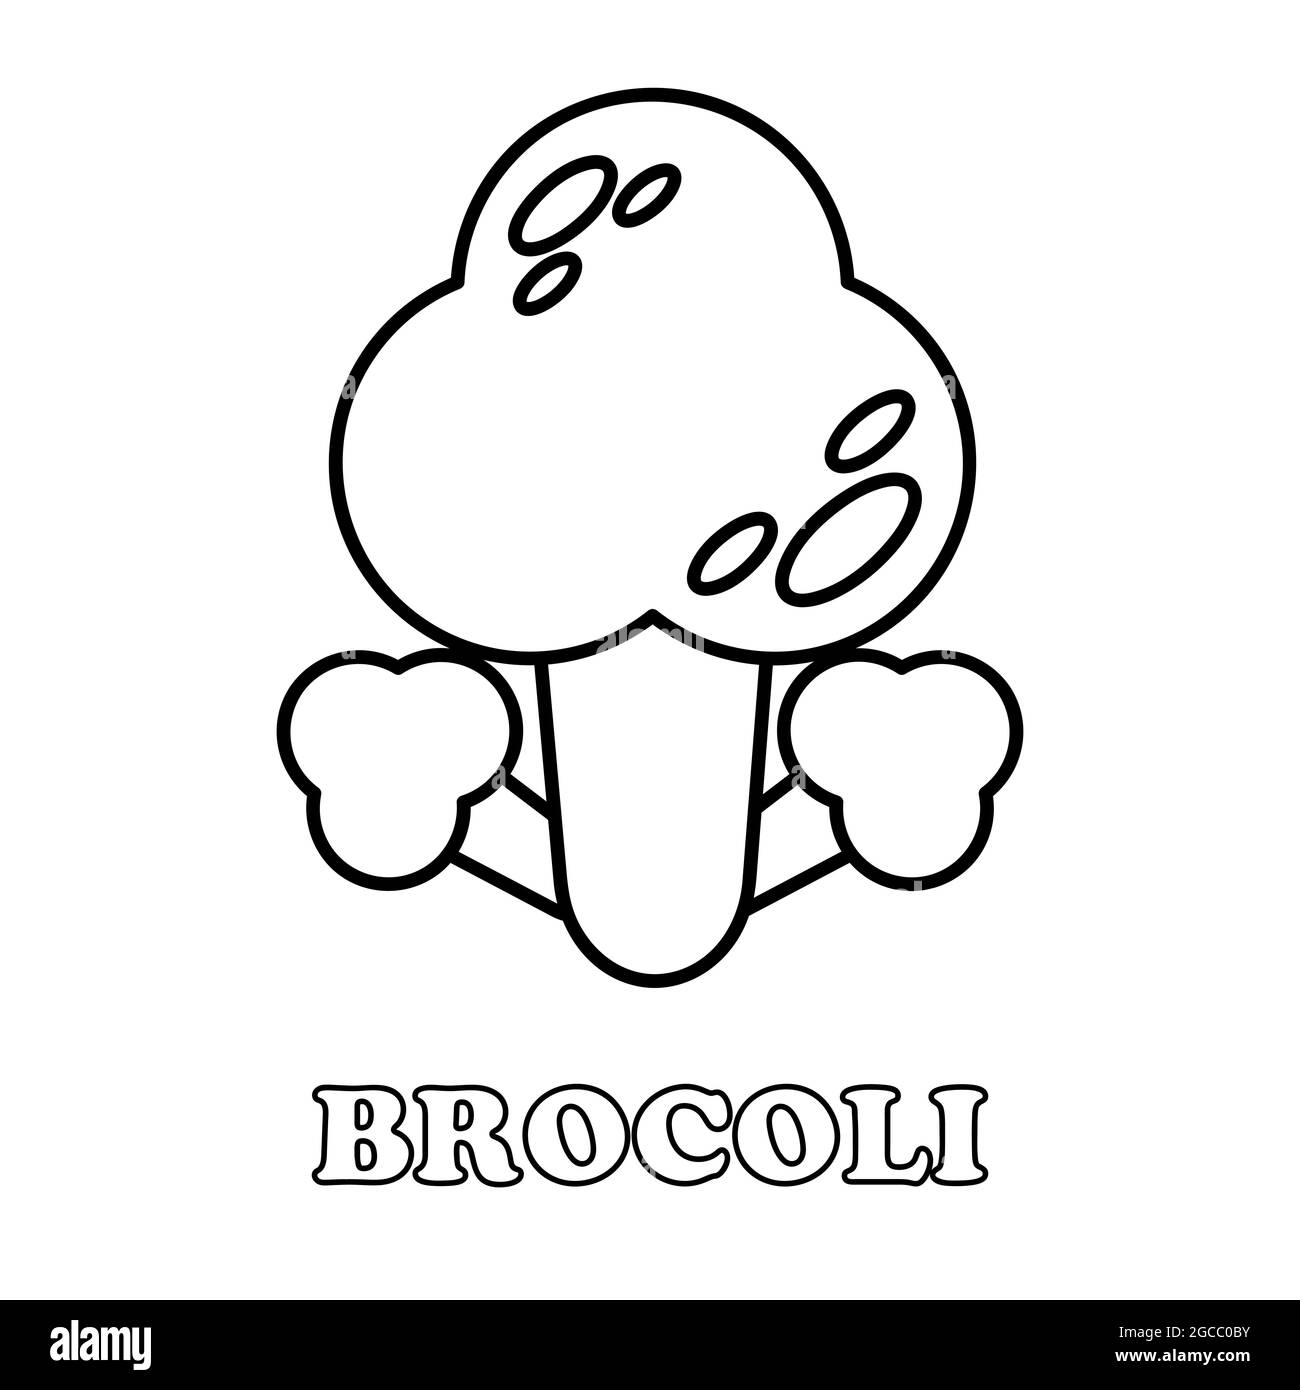 brocoli coloring page. healthy food coloring page for children on white background Stock Photo